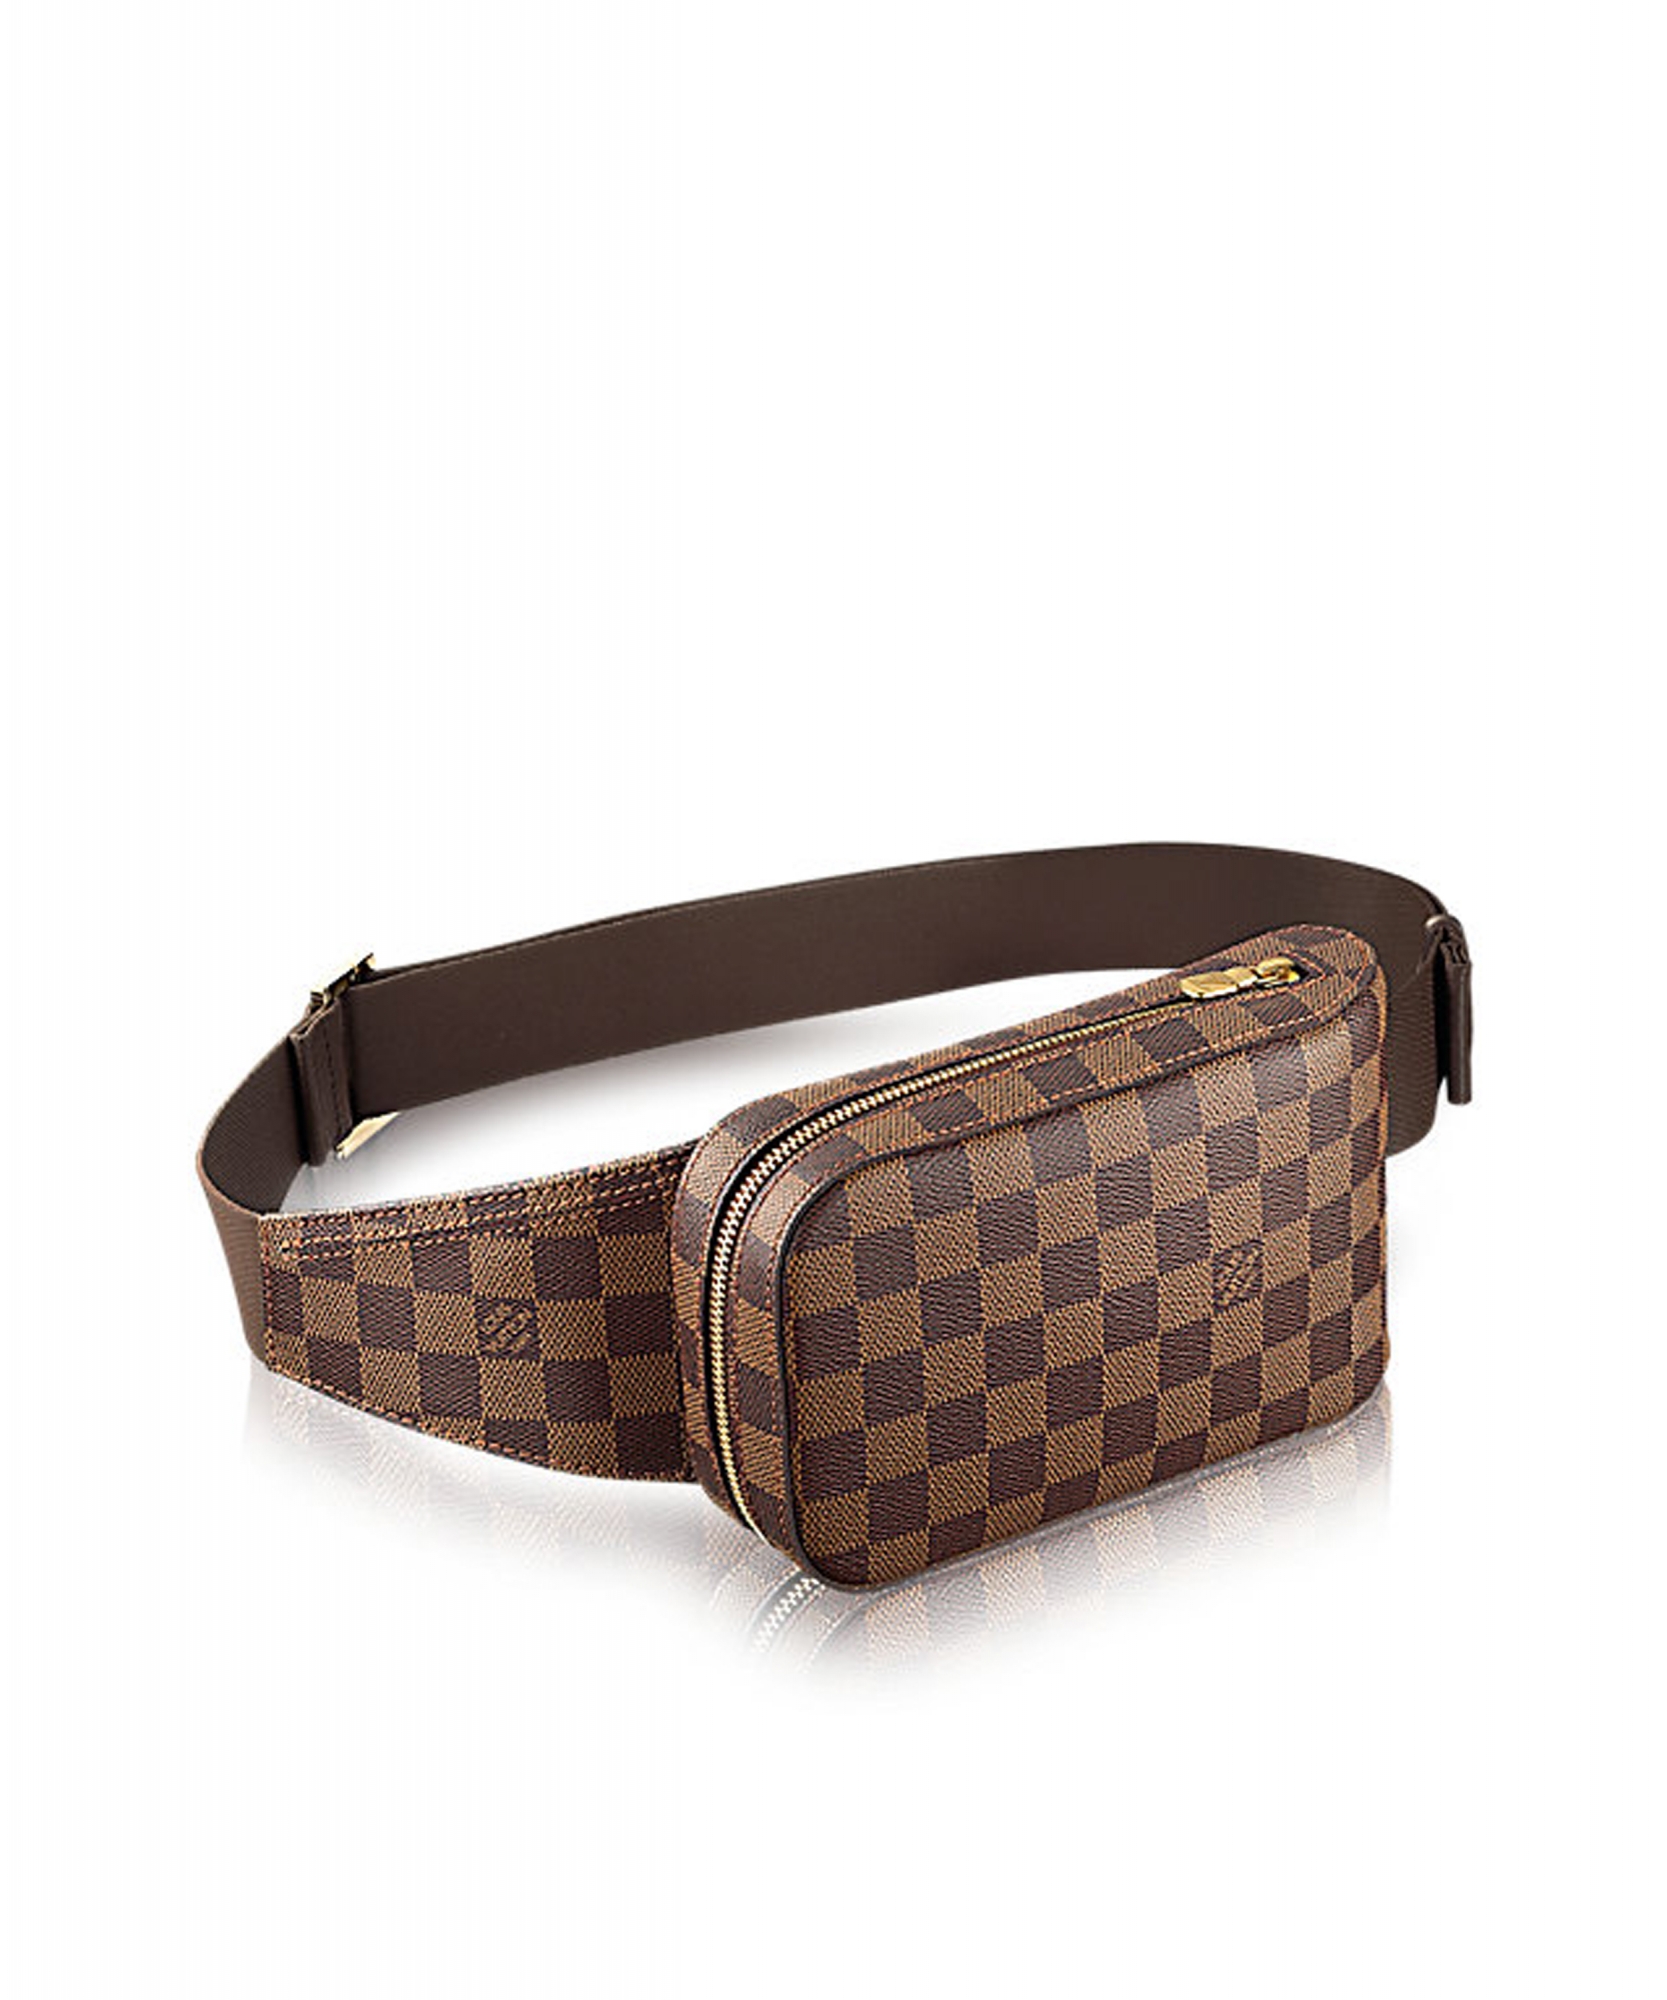 hypothese bungeejumpen Vul in Buideltas Louis Vuitton Factory Sale - playgrowned.com 1691179720